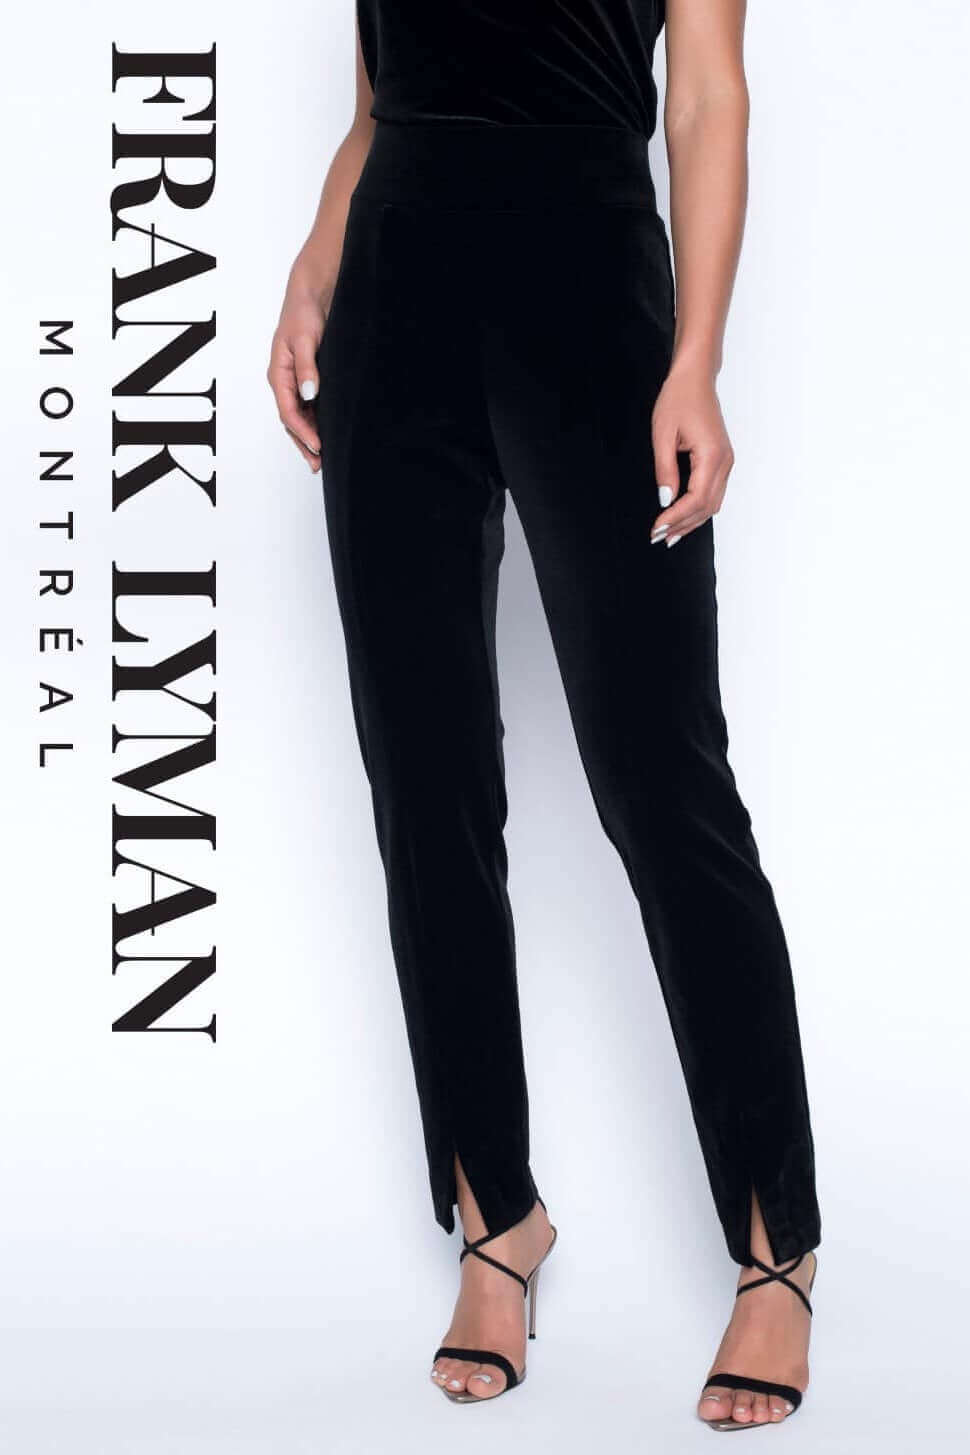 Frank Lyman Pant Style 199333 from BelleMiaBoutique.com 